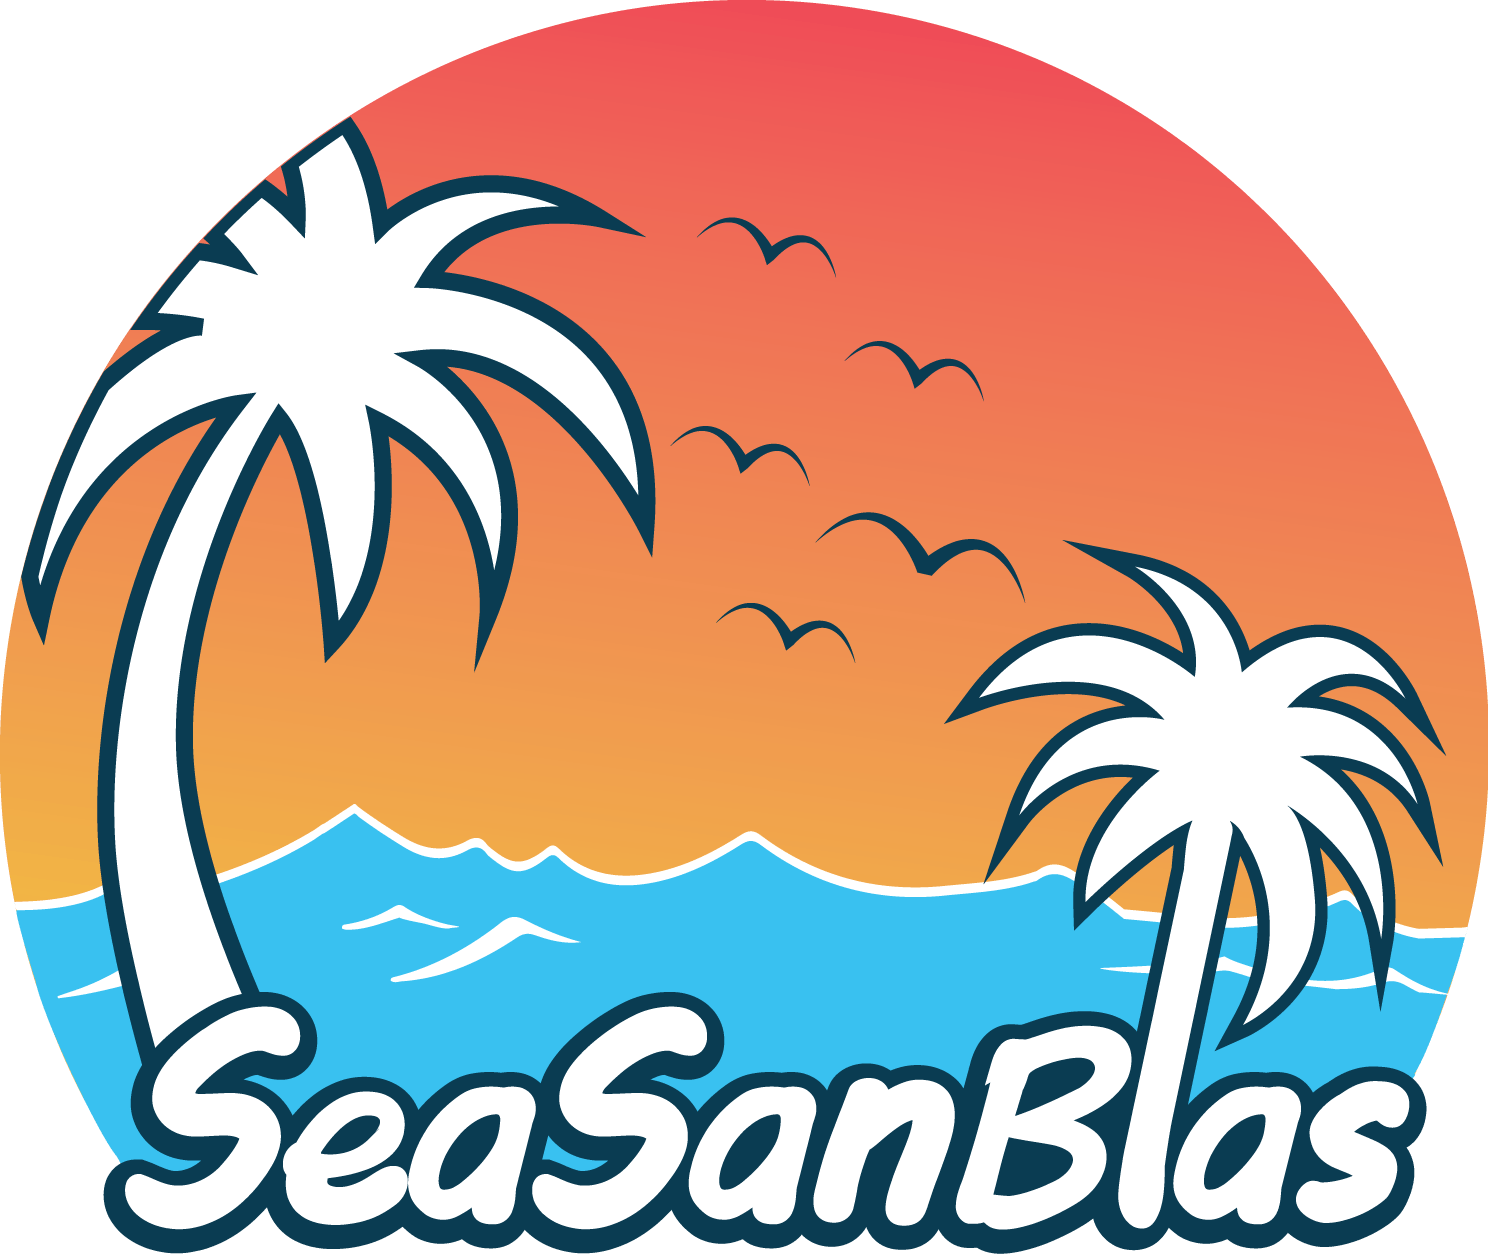 a logo for sea san blas with palm trees and birds